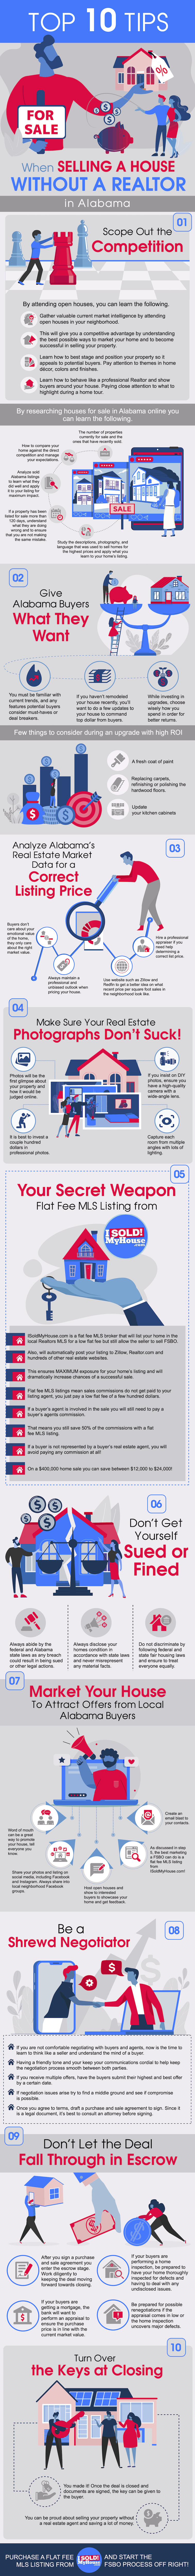 infographic of the 10 steps to sell a house in alabama without an agent